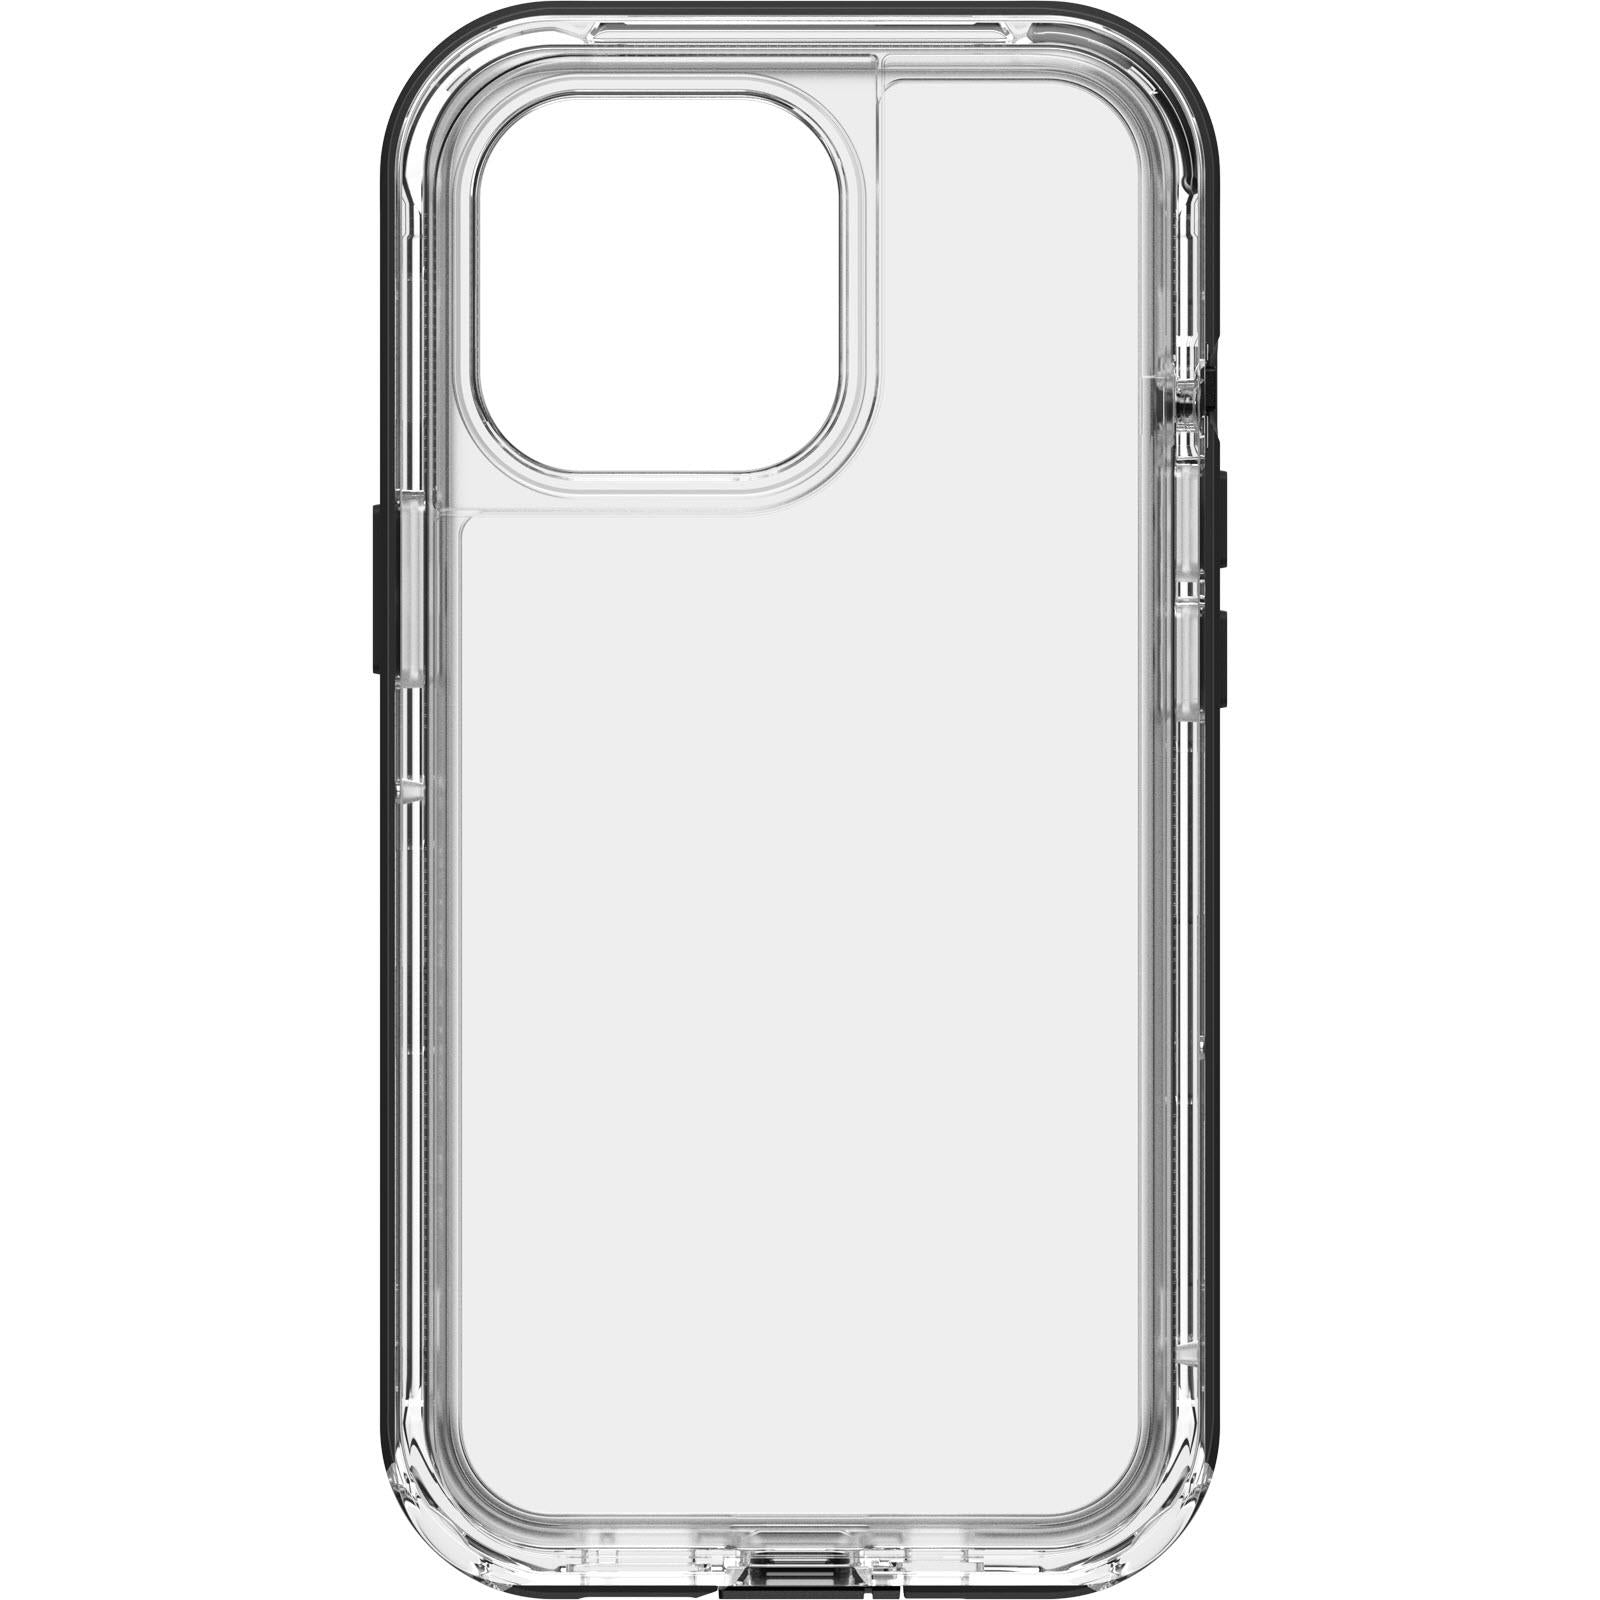 lifeproof next case for iphone 13 pro (black crystal)